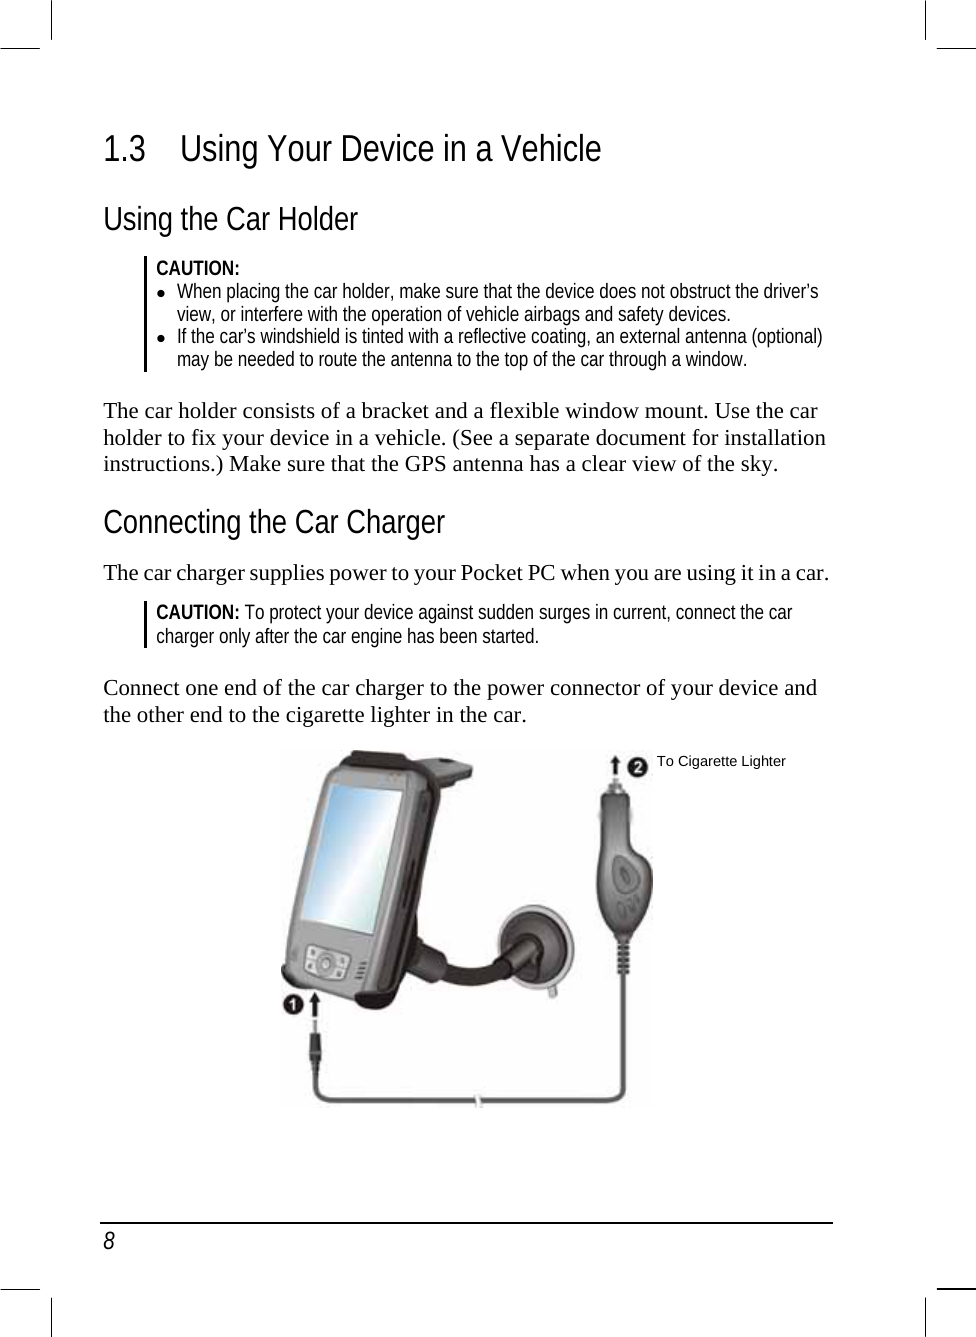  8 1.3  Using Your Device in a Vehicle Using the Car Holder CAUTION:  When placing the car holder, make sure that the device does not obstruct the driver’s view, or interfere with the operation of vehicle airbags and safety devices.  If the car’s windshield is tinted with a reflective coating, an external antenna (optional) may be needed to route the antenna to the top of the car through a window.  The car holder consists of a bracket and a flexible window mount. Use the car holder to fix your device in a vehicle. (See a separate document for installation instructions.) Make sure that the GPS antenna has a clear view of the sky. Connecting the Car Charger The car charger supplies power to your Pocket PC when you are using it in a car.  CAUTION: To protect your device against sudden surges in current, connect the car charger only after the car engine has been started.  Connect one end of the car charger to the power connector of your device and the other end to the cigarette lighter in the car.   To Cigarette Lighter 